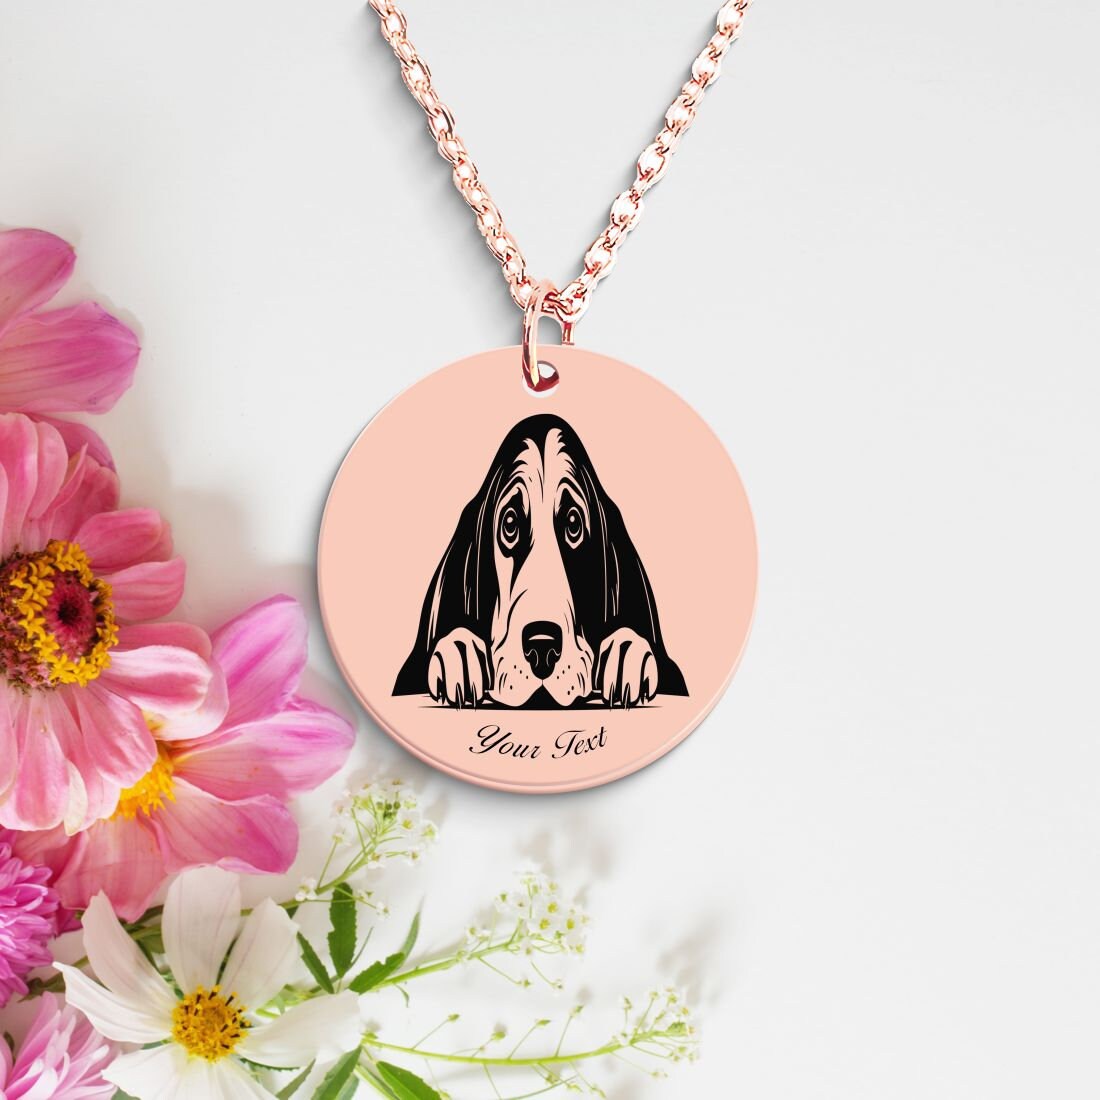 Afghan Hound Dog Portrait Necklace - Personalizable Jewelry